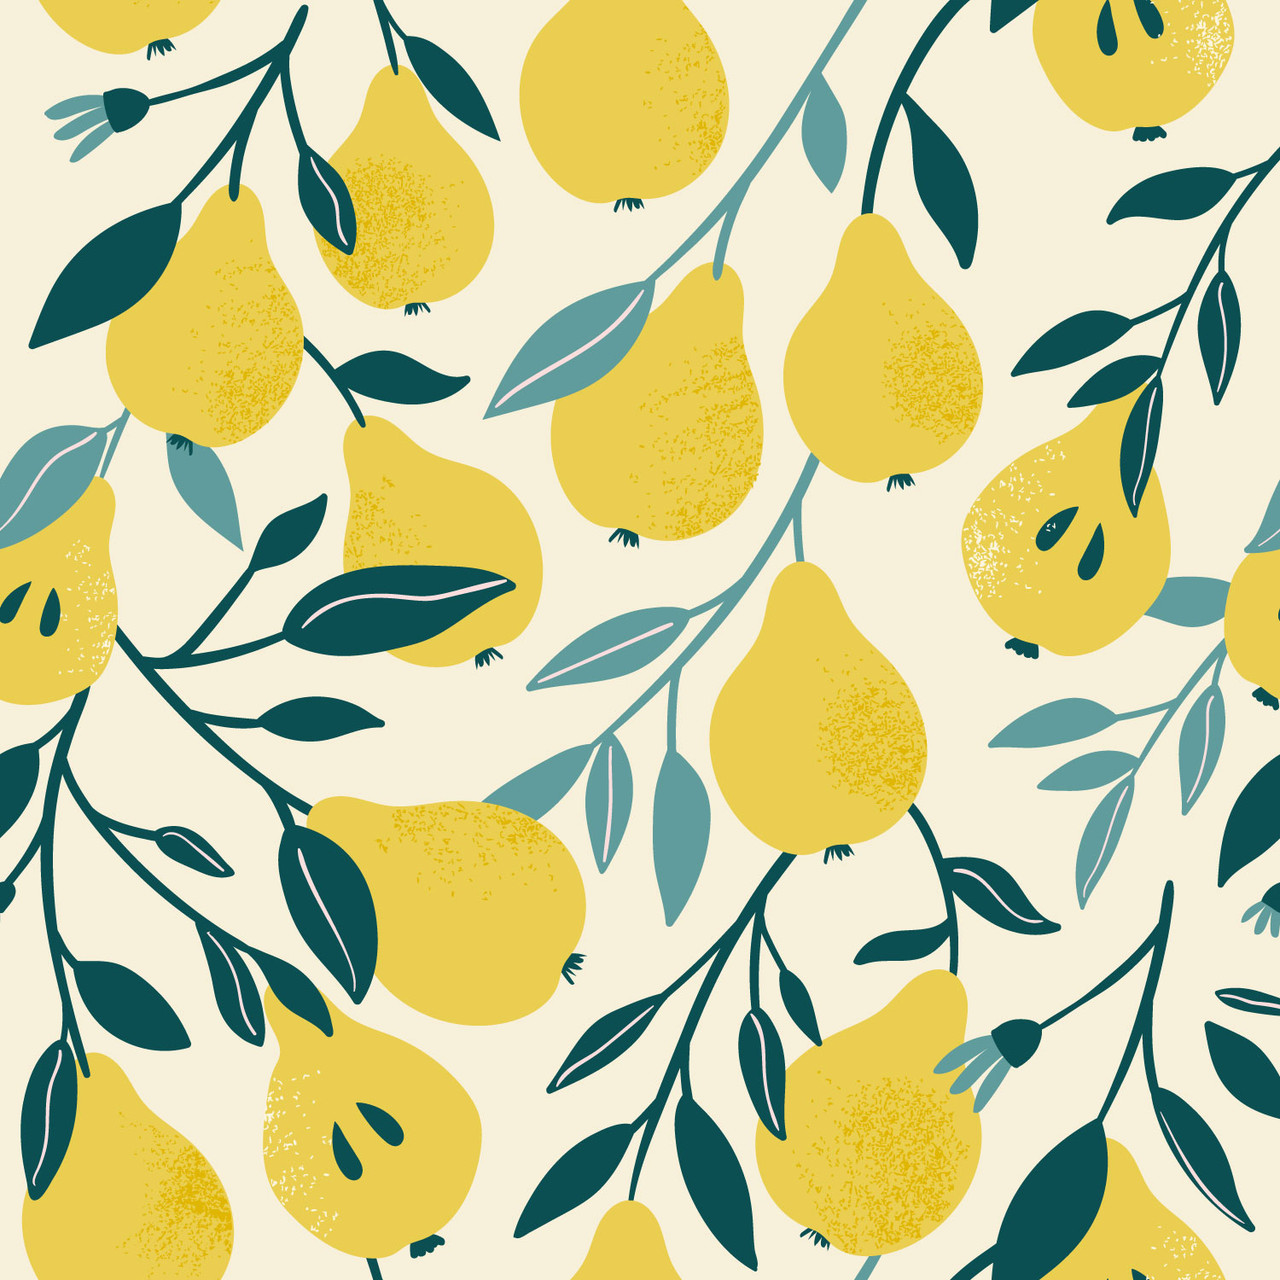 Isolated pear background design Royalty Free Vector Image